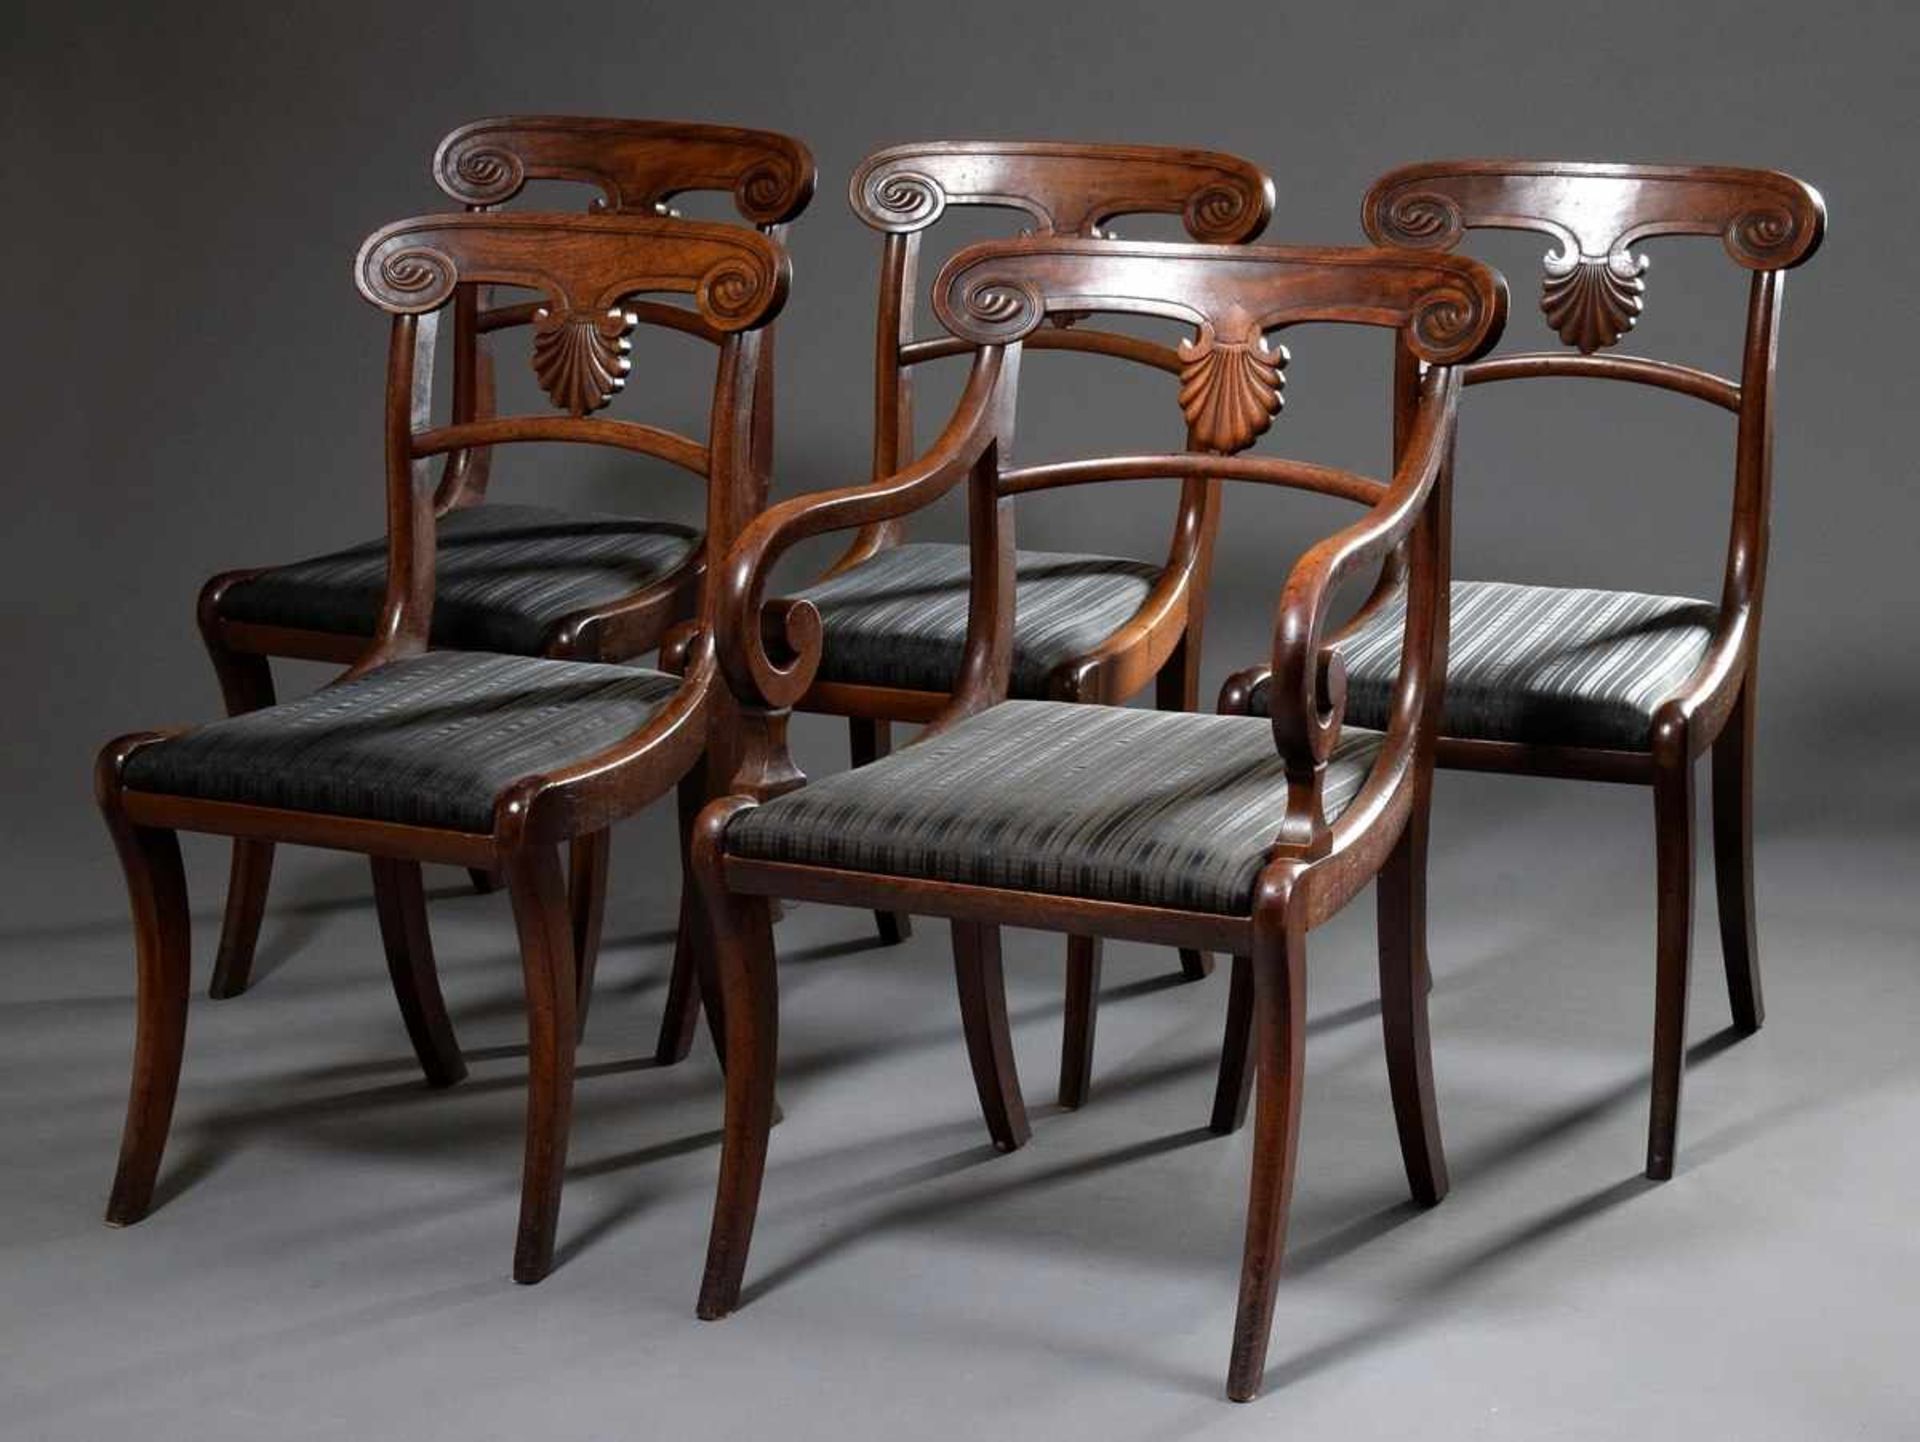 5 English Sheraton chairs with carved backrests and sabre legs, 1x with armrests, mahogany, - Bild 2 aus 7